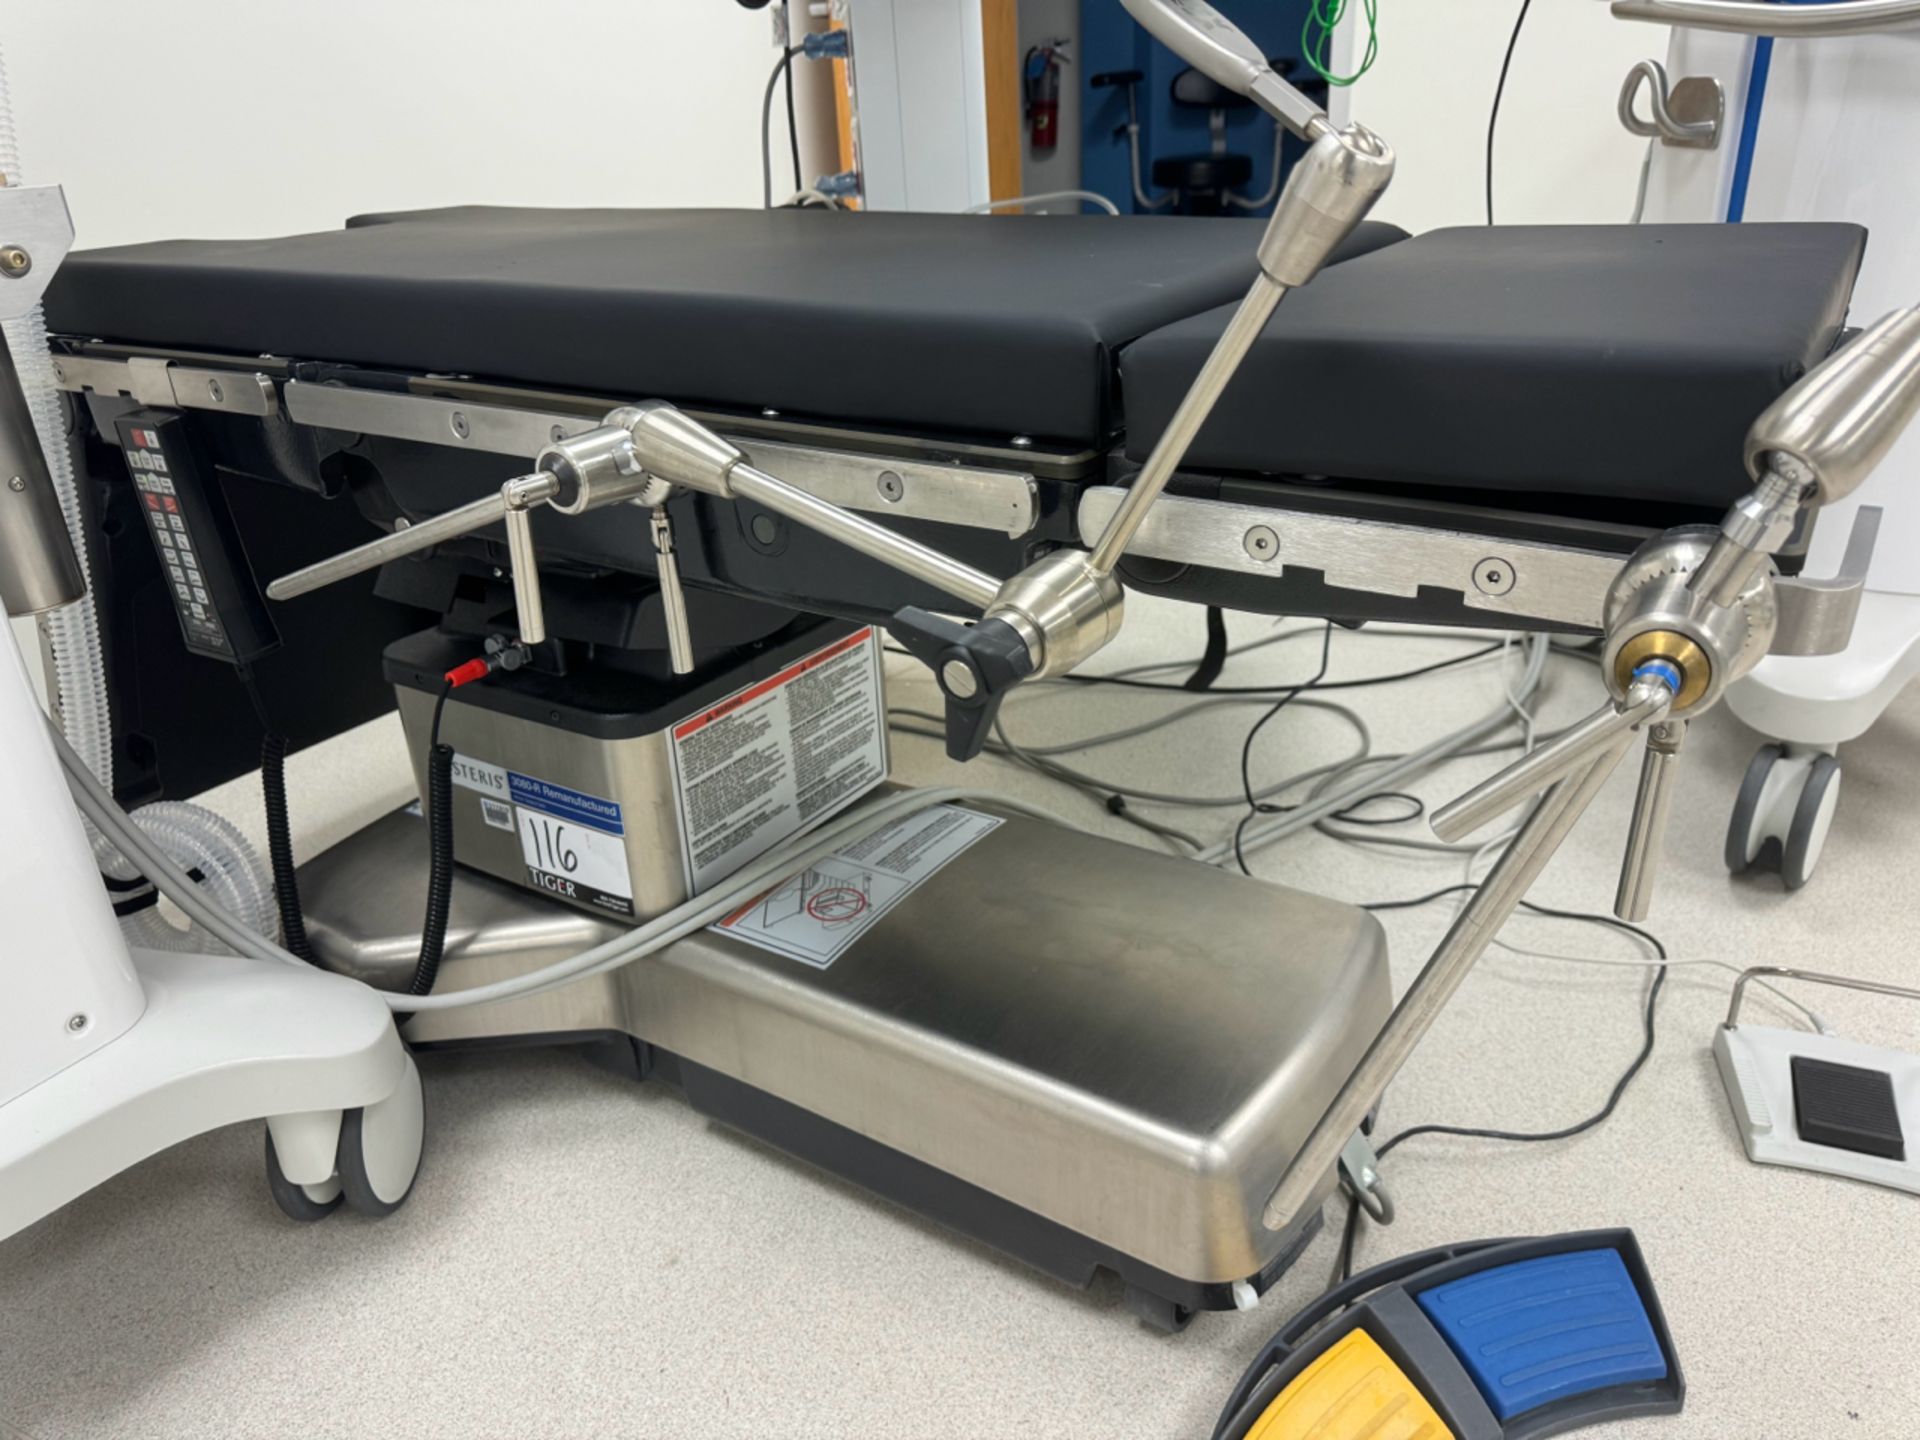 Steris Medical Surgical Table